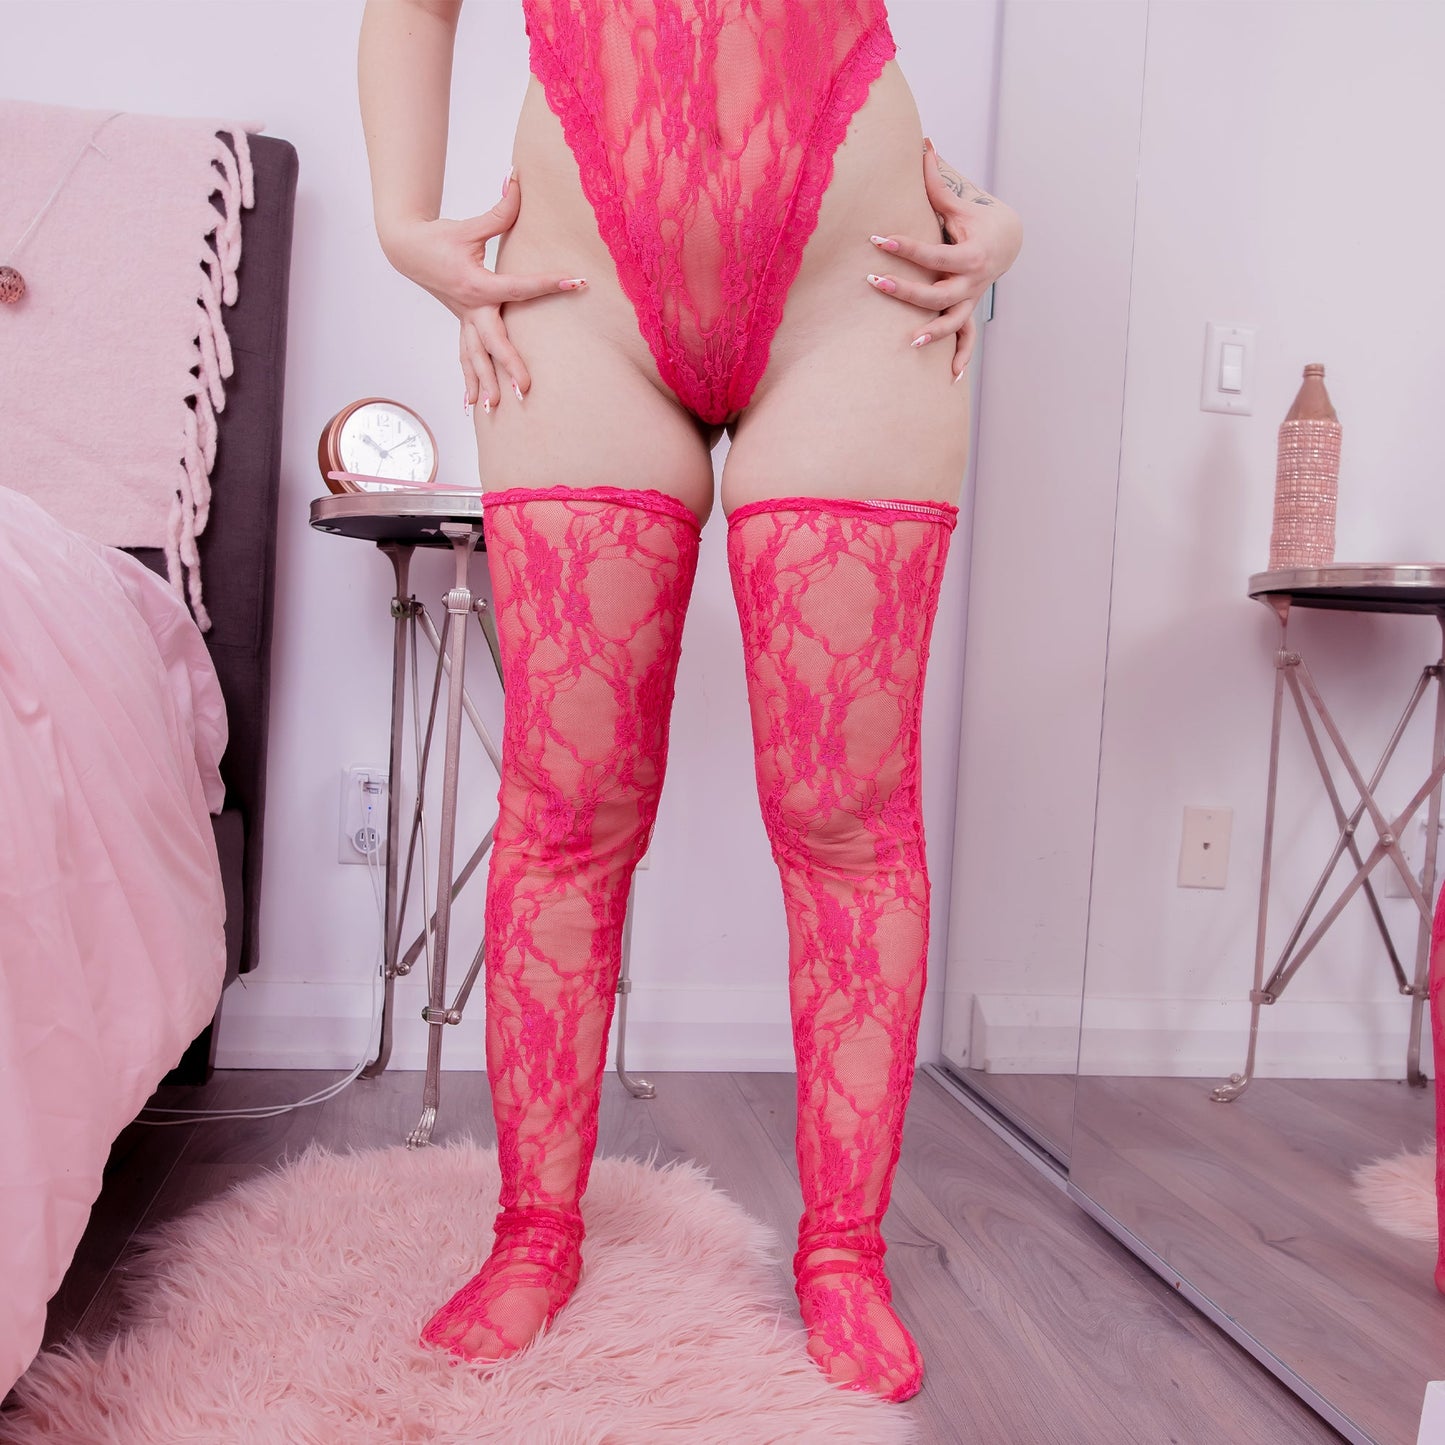 Red Lace Teddy Lingerie by Lewd Fashion